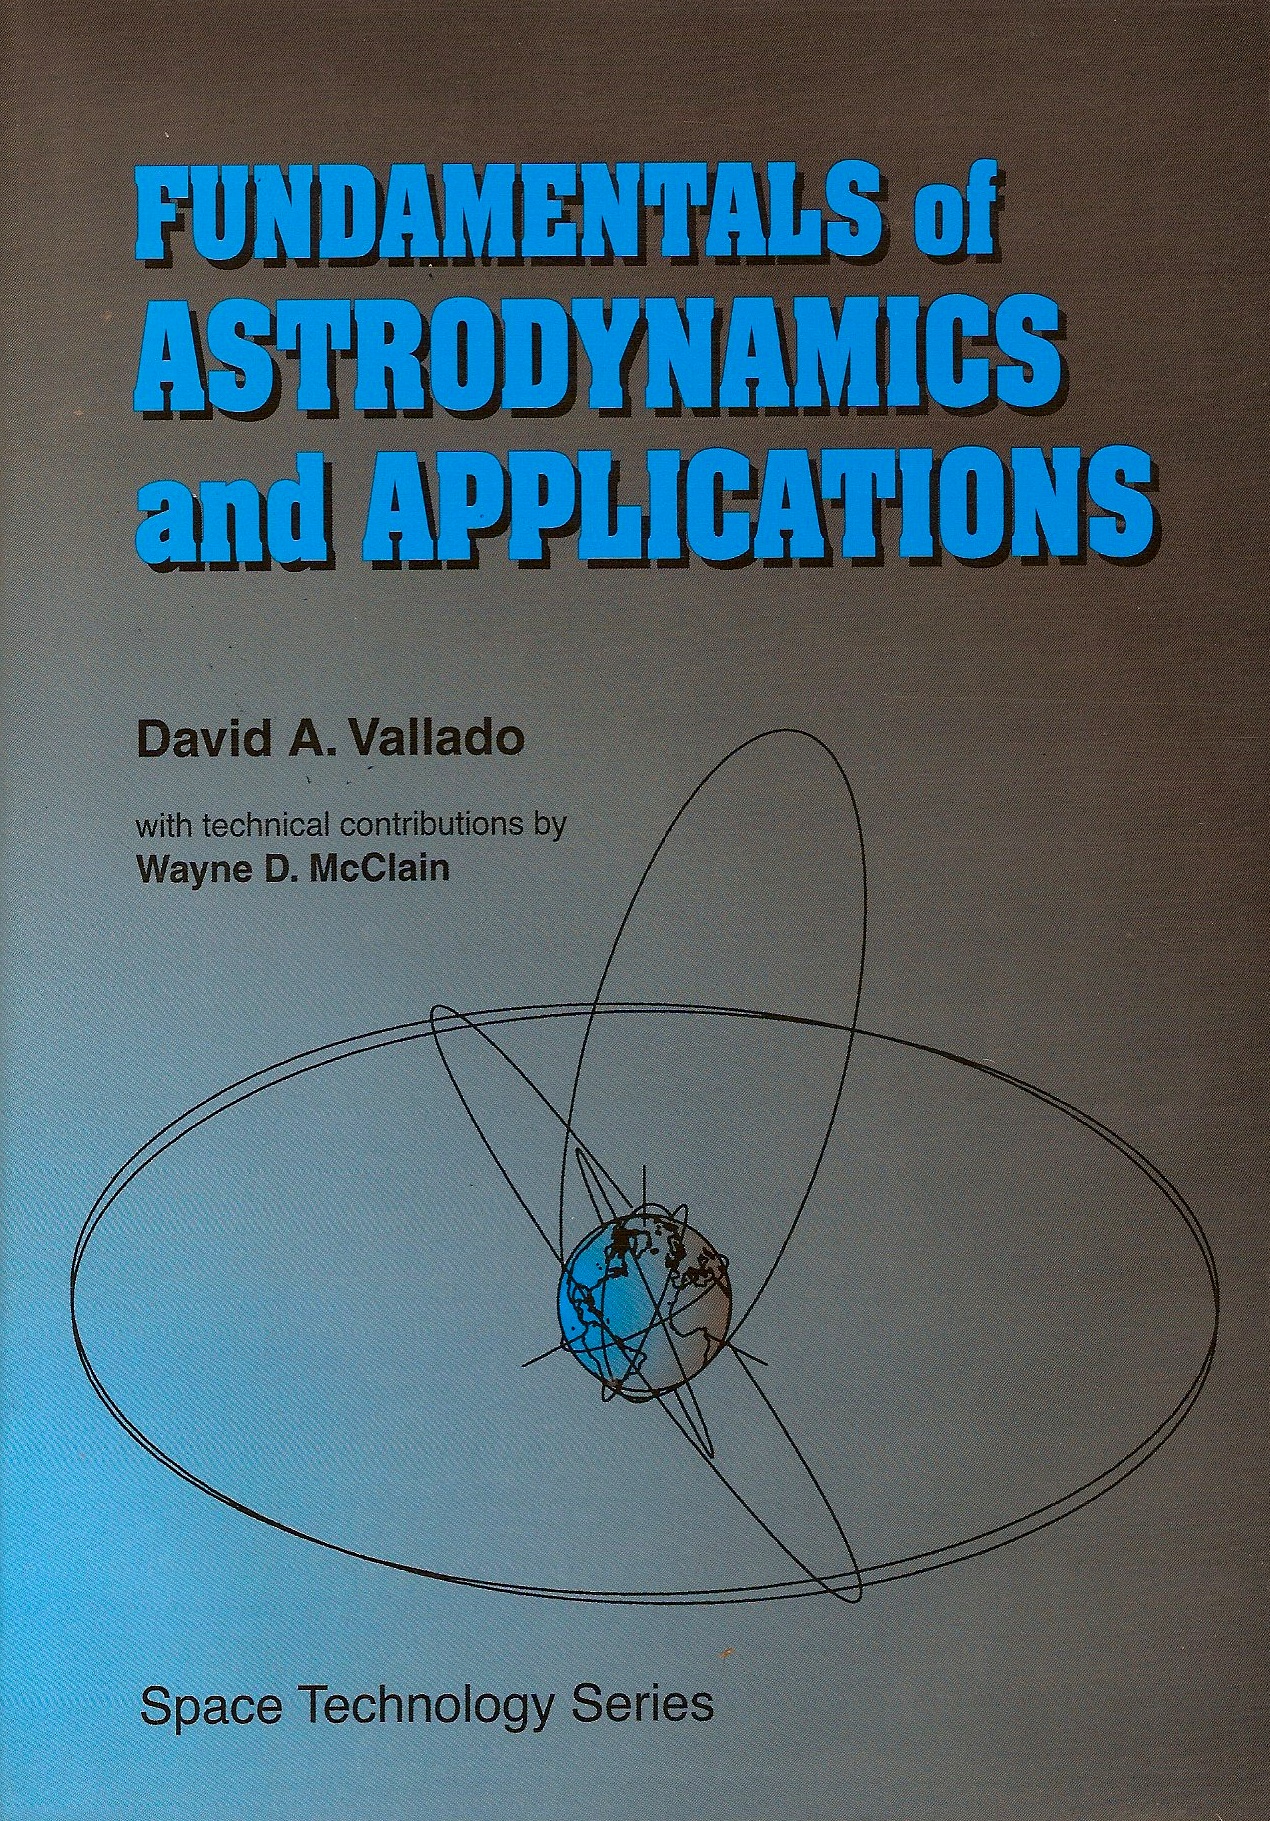 Fundamentals of astrodynamics and applications pdf download download thothub video